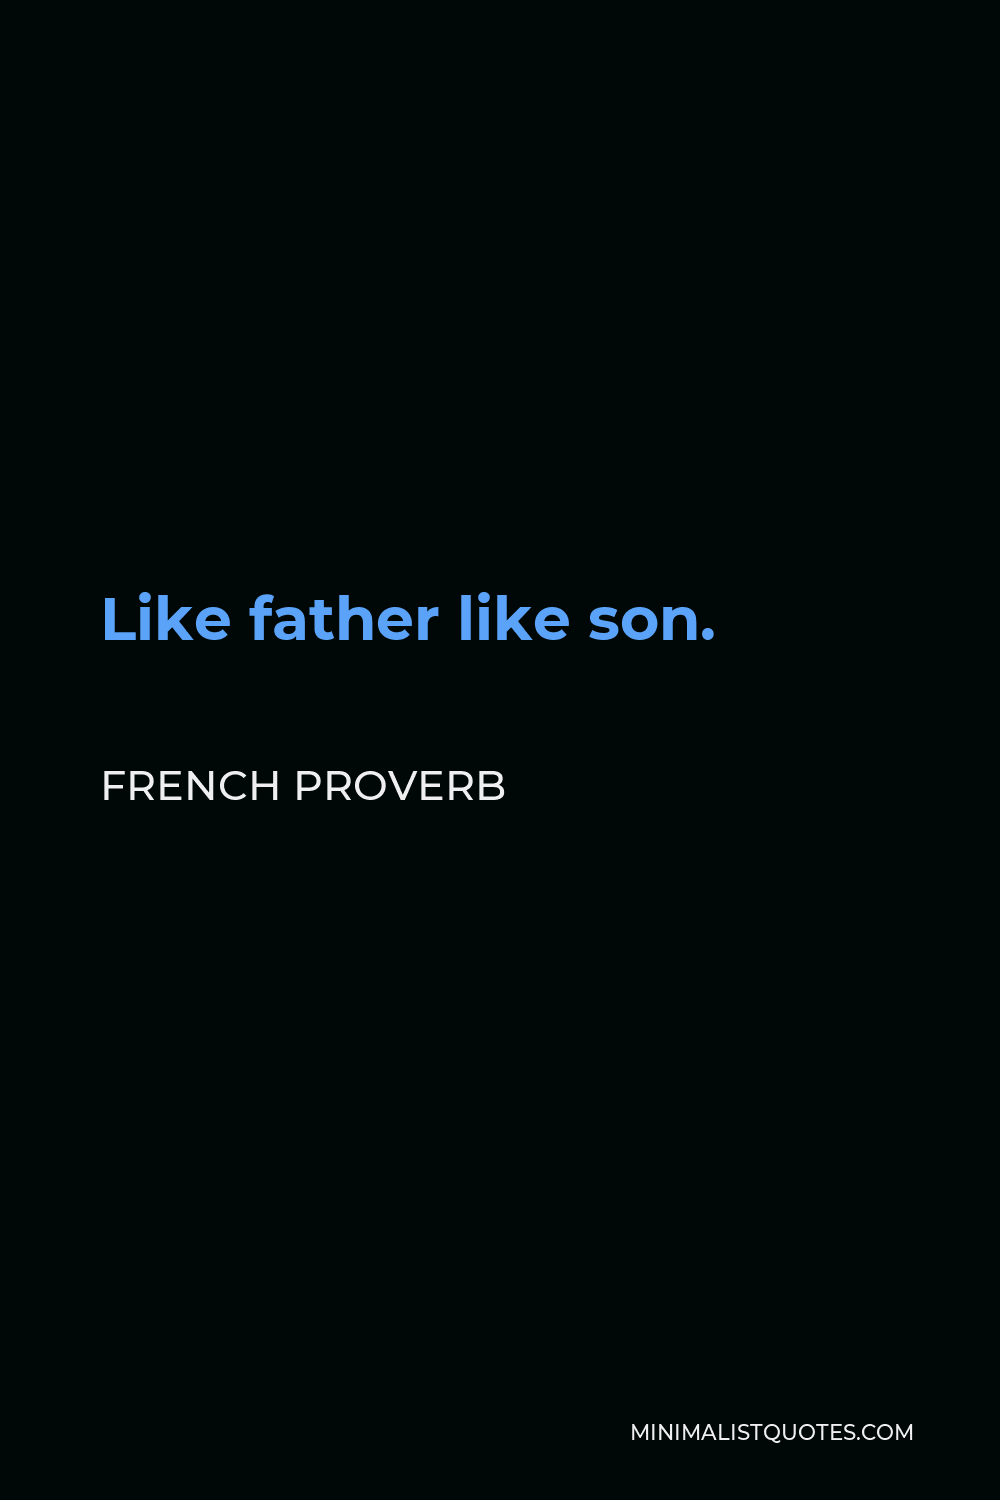 French Proverb Quote - Like father like son.